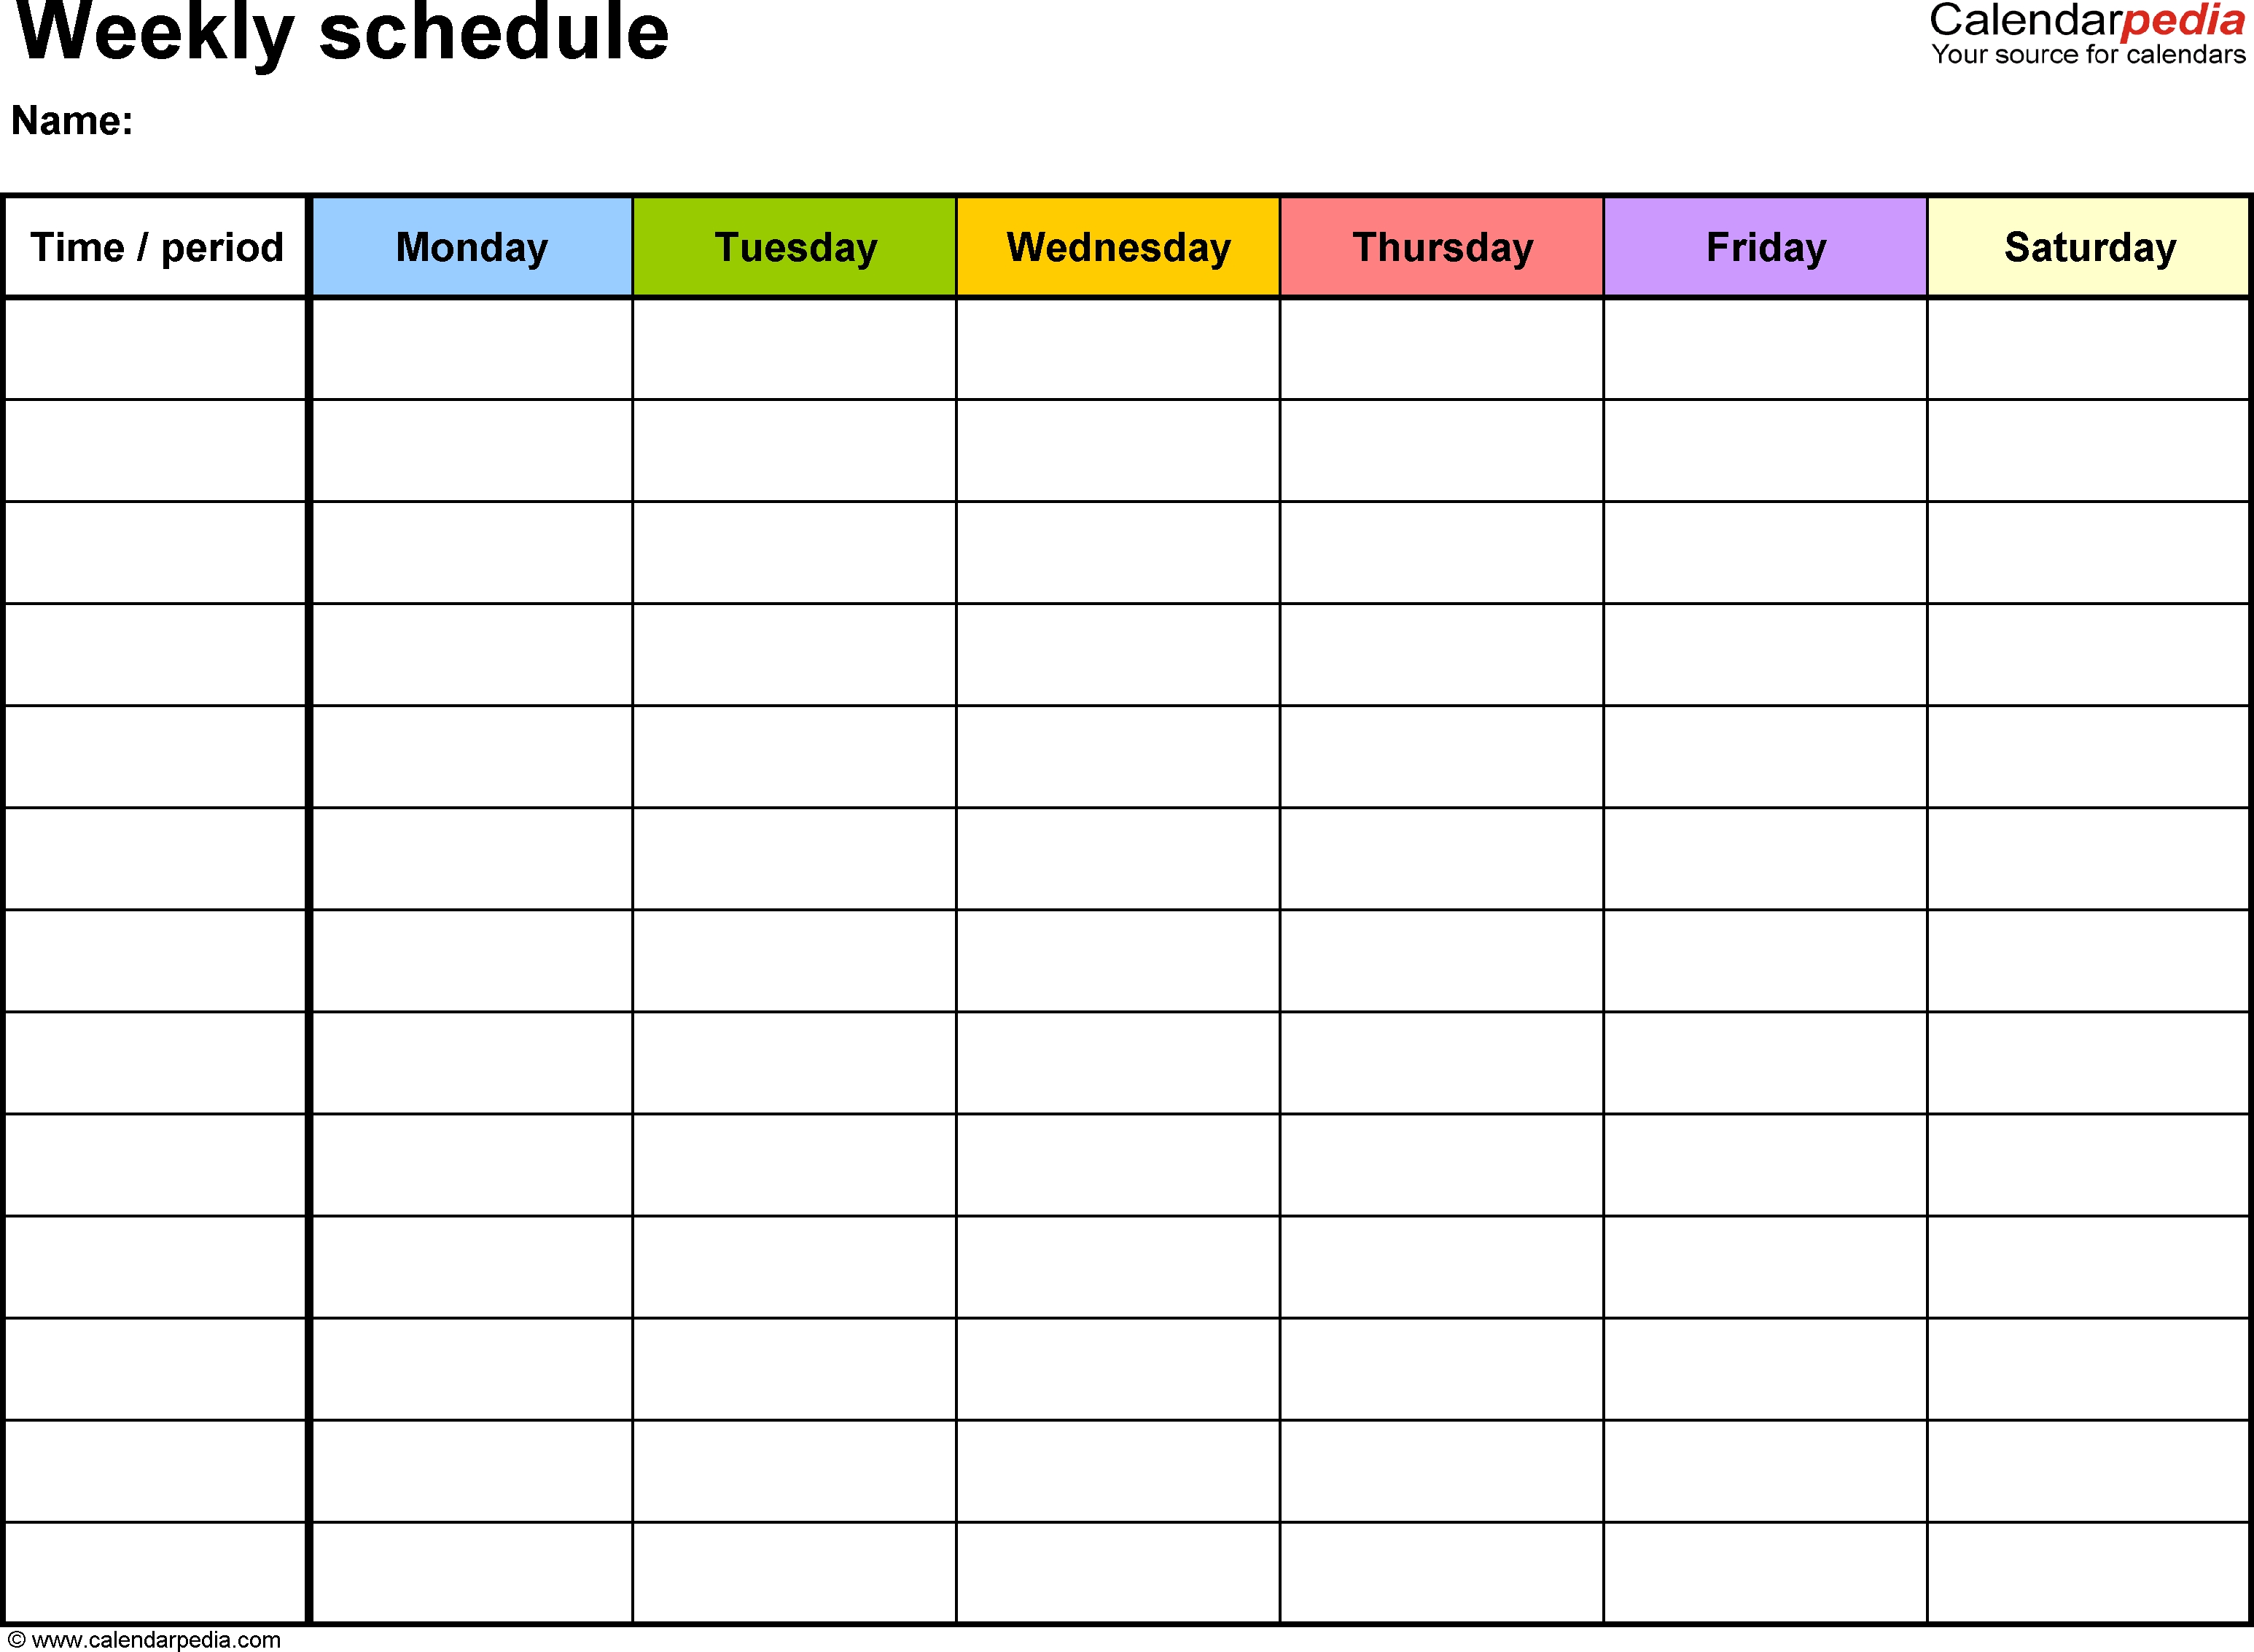 Free Weekly Schedule Templates For Word - 18 Templates  Printable Weekly Planner For The Week